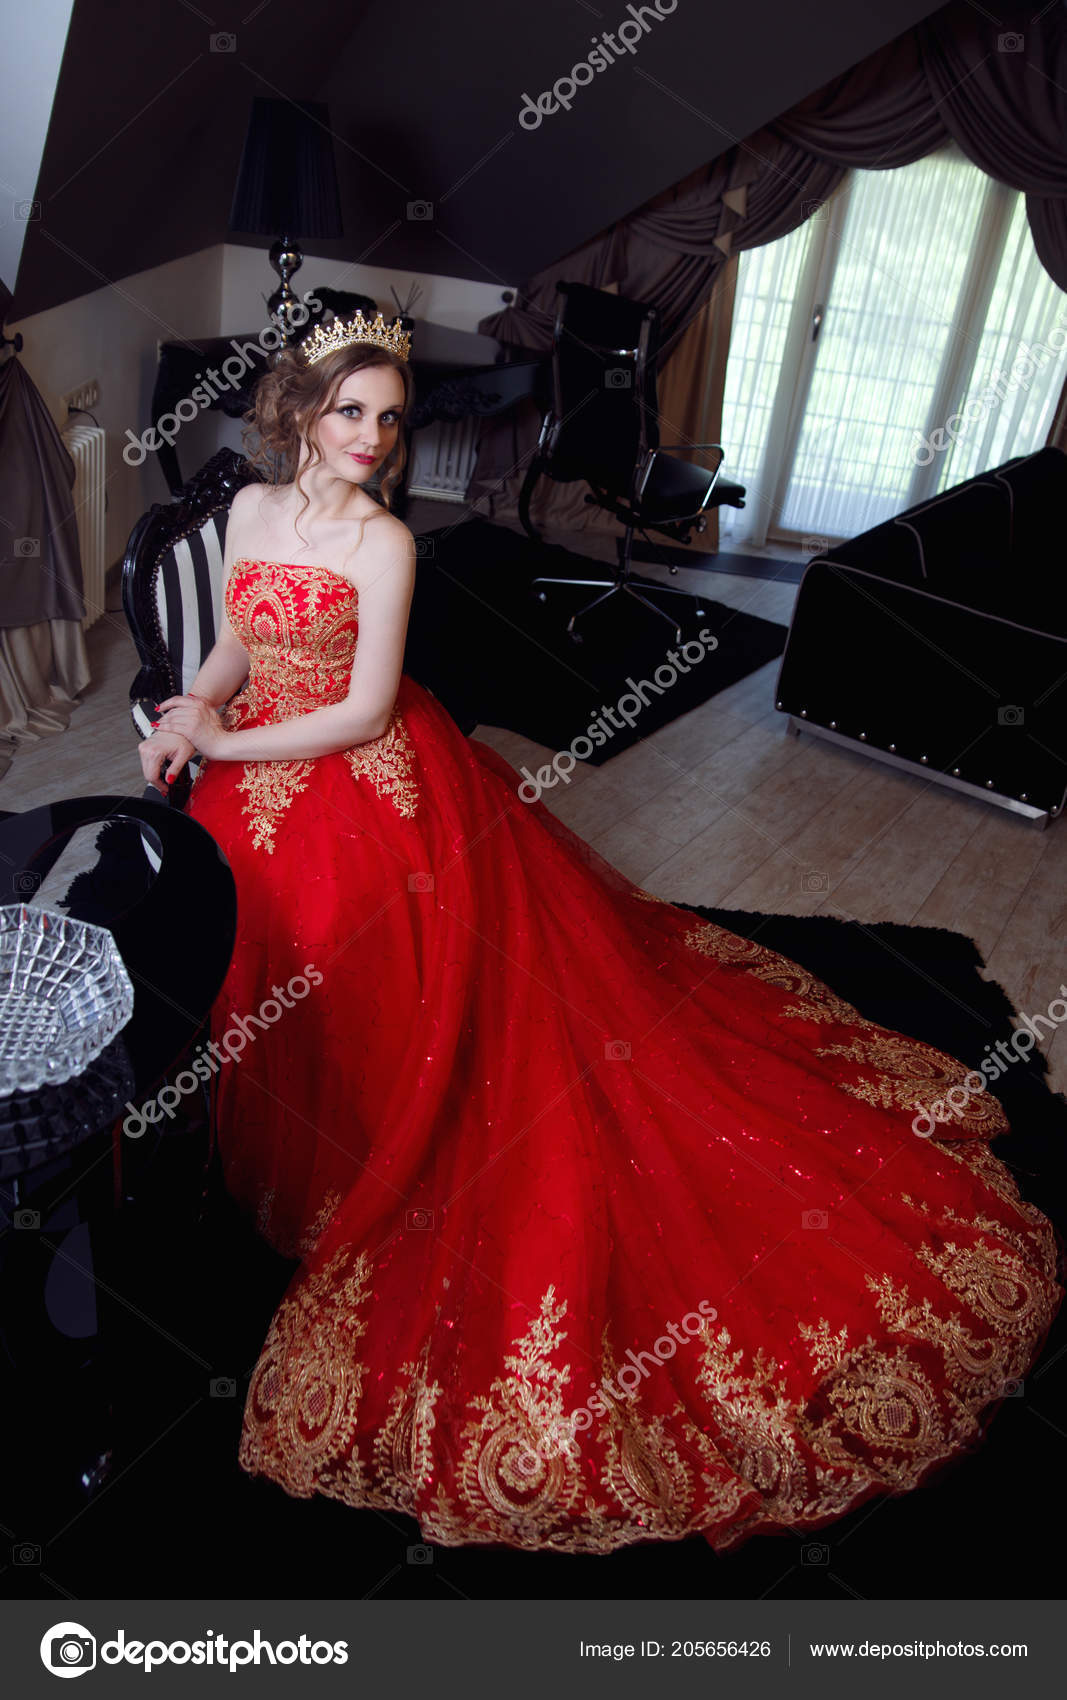 Beautiful　Crown　by　Stock　Chic　Woman　Chic　©Ksenia_Pelevina　Dress　Red　Photo　Interior　205656426